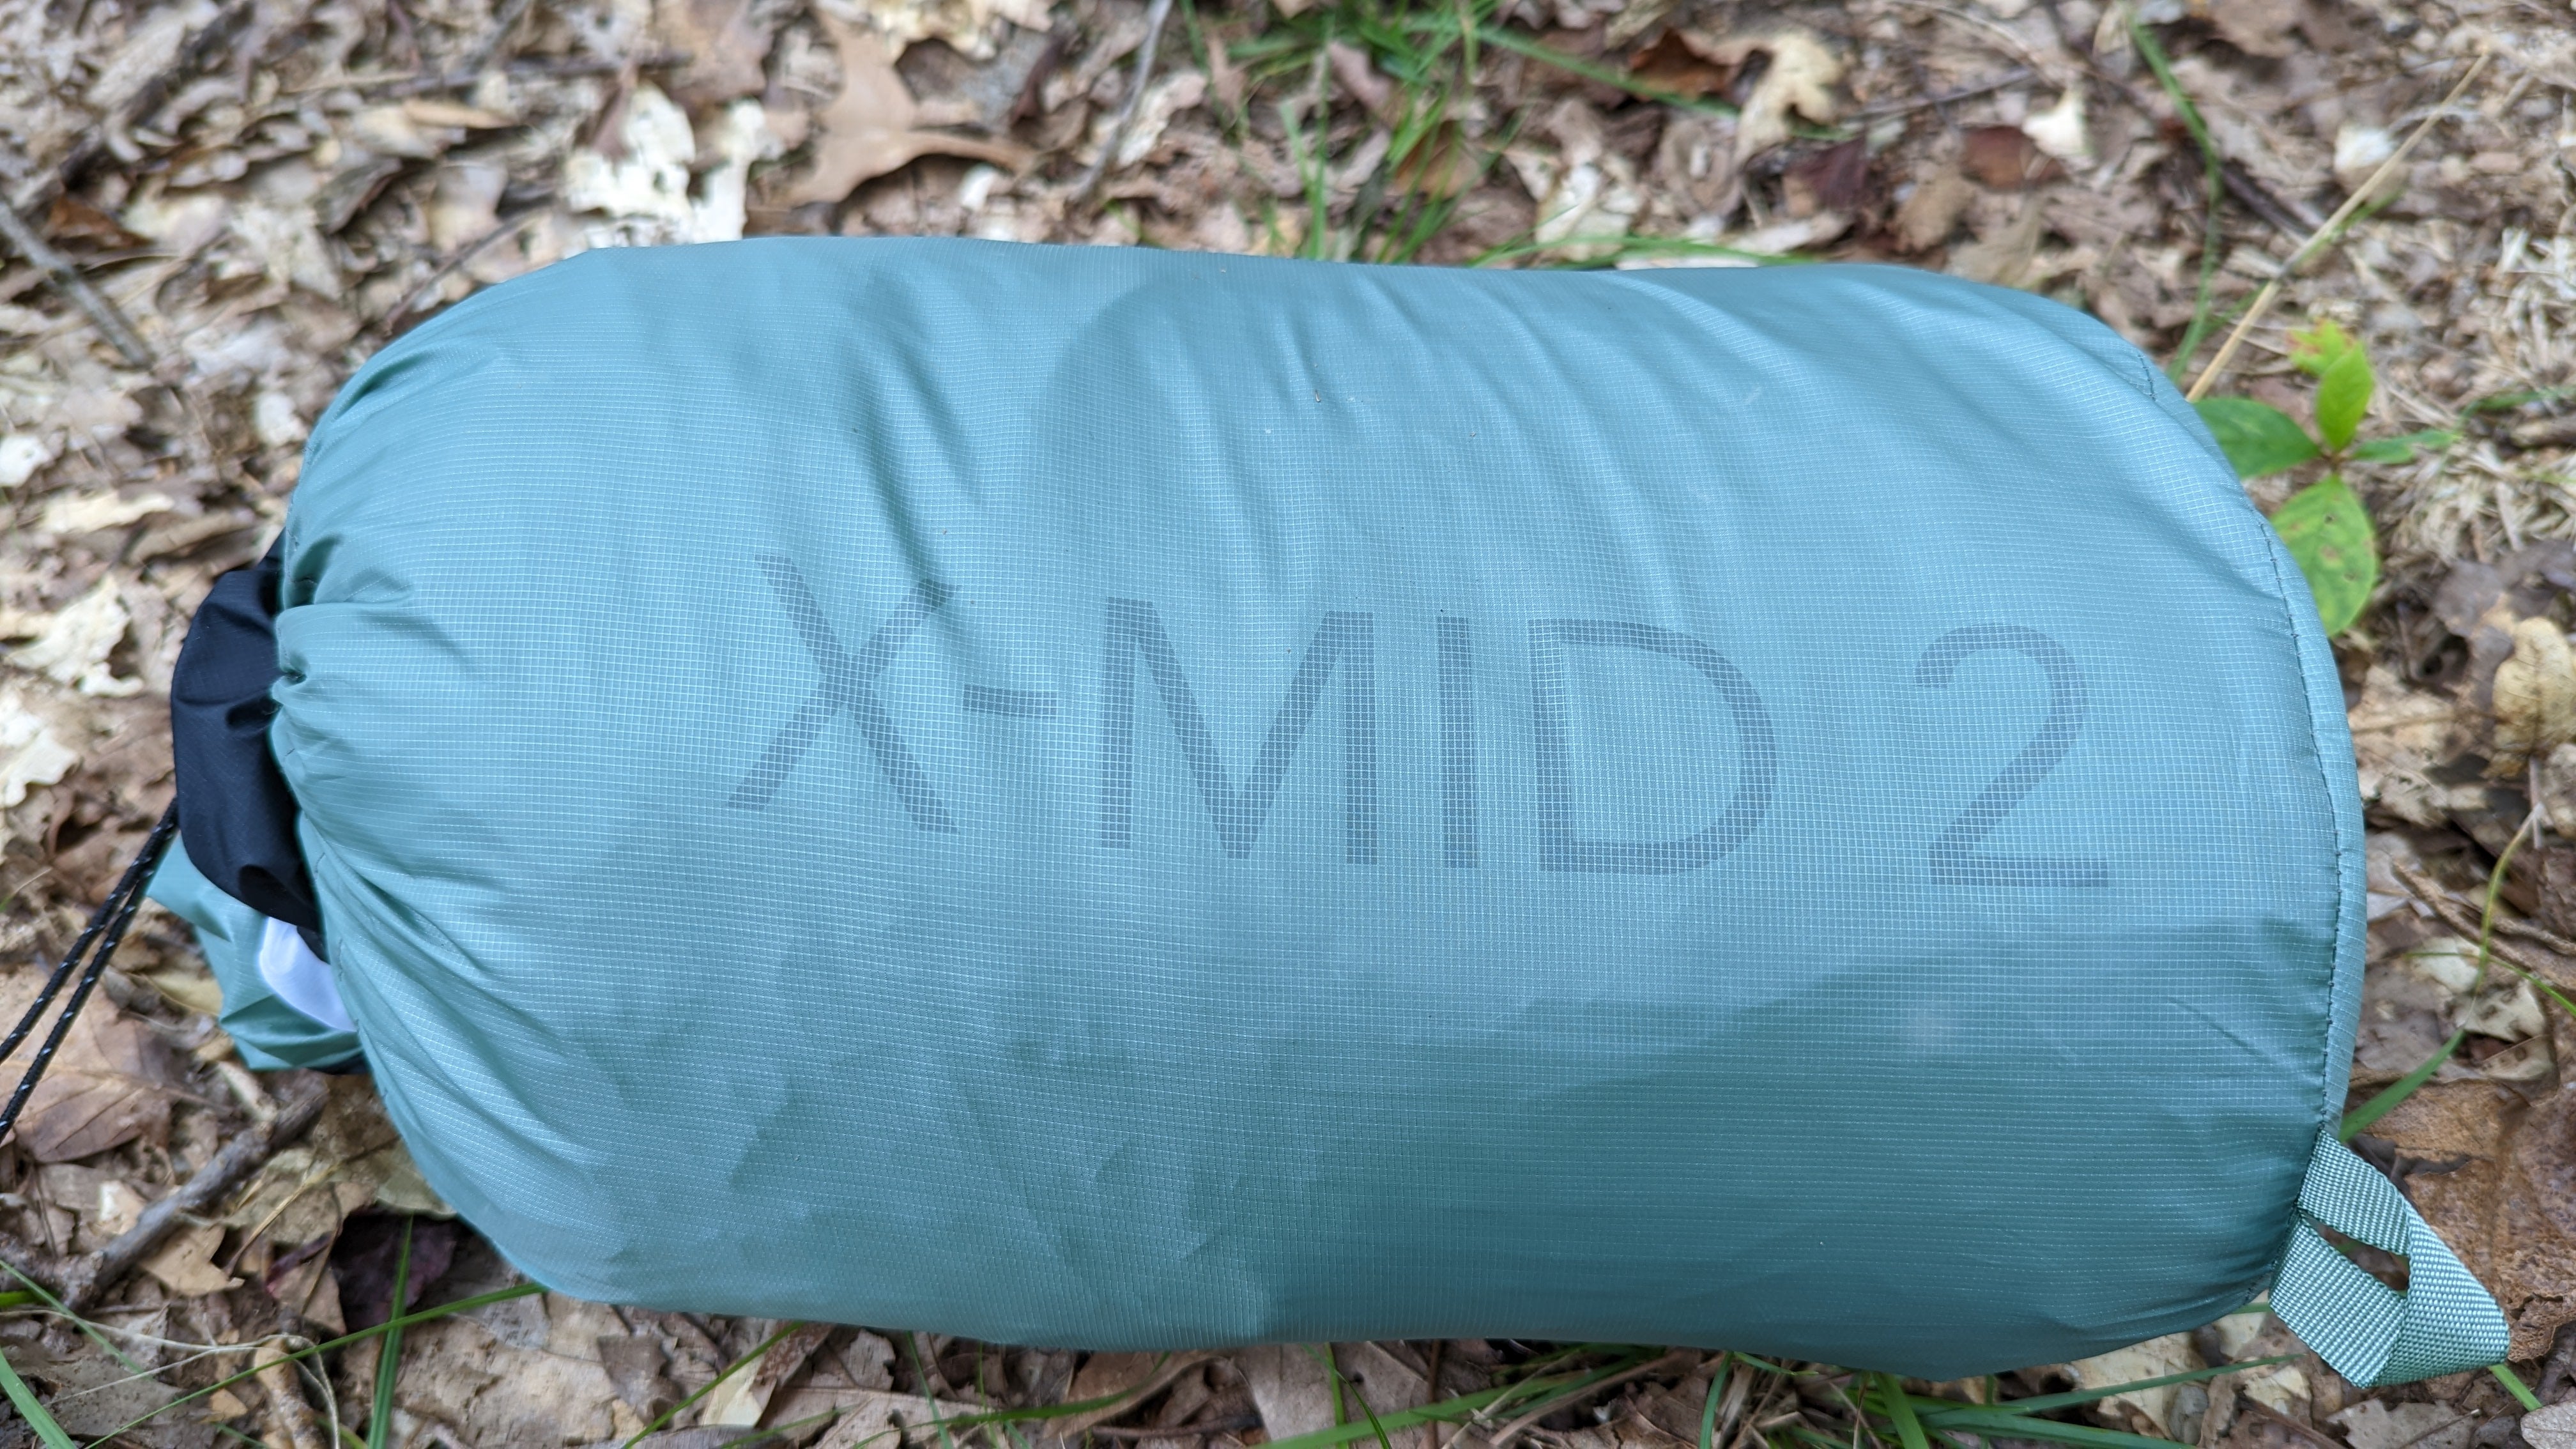 Dan Durston Gear X-Mid 2 Solid Wall Tent two trekking poles fly first pitch packed stuff sack